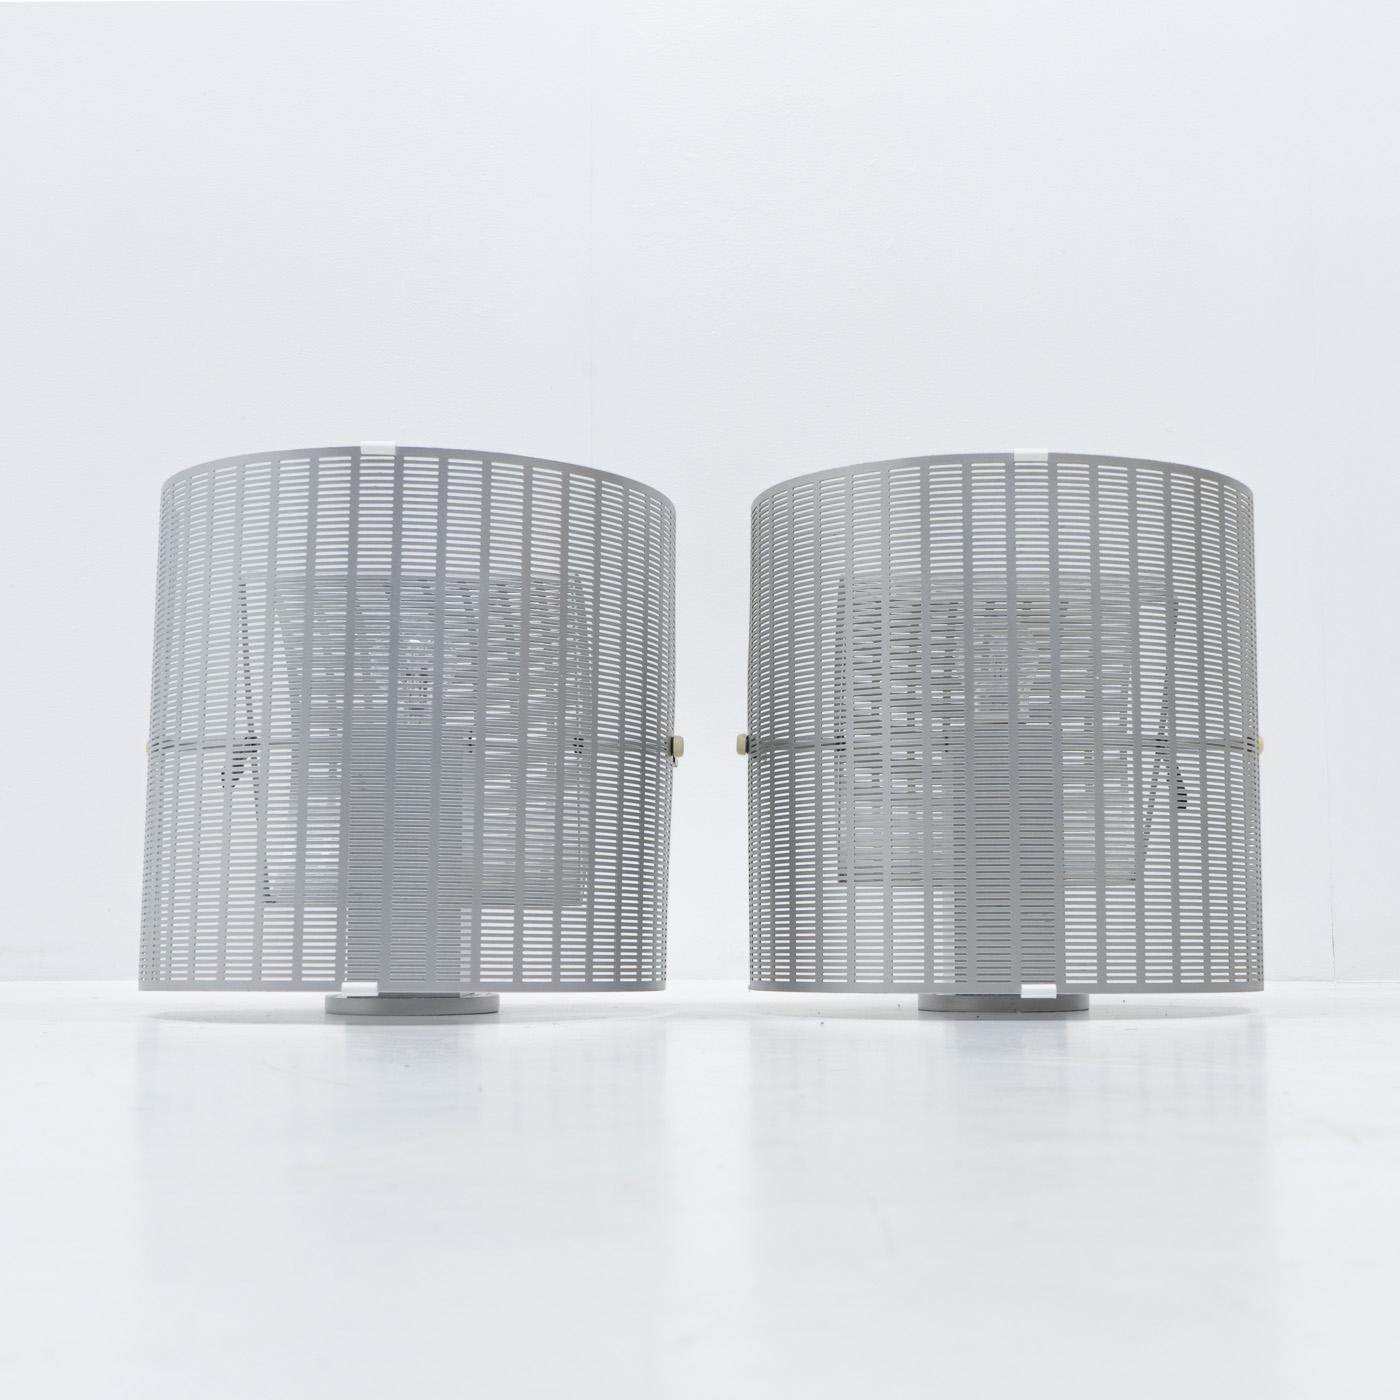 Limited Edition Shogun Wall Lamps by Mario Botta for Artemide, 1980s For Sale 3